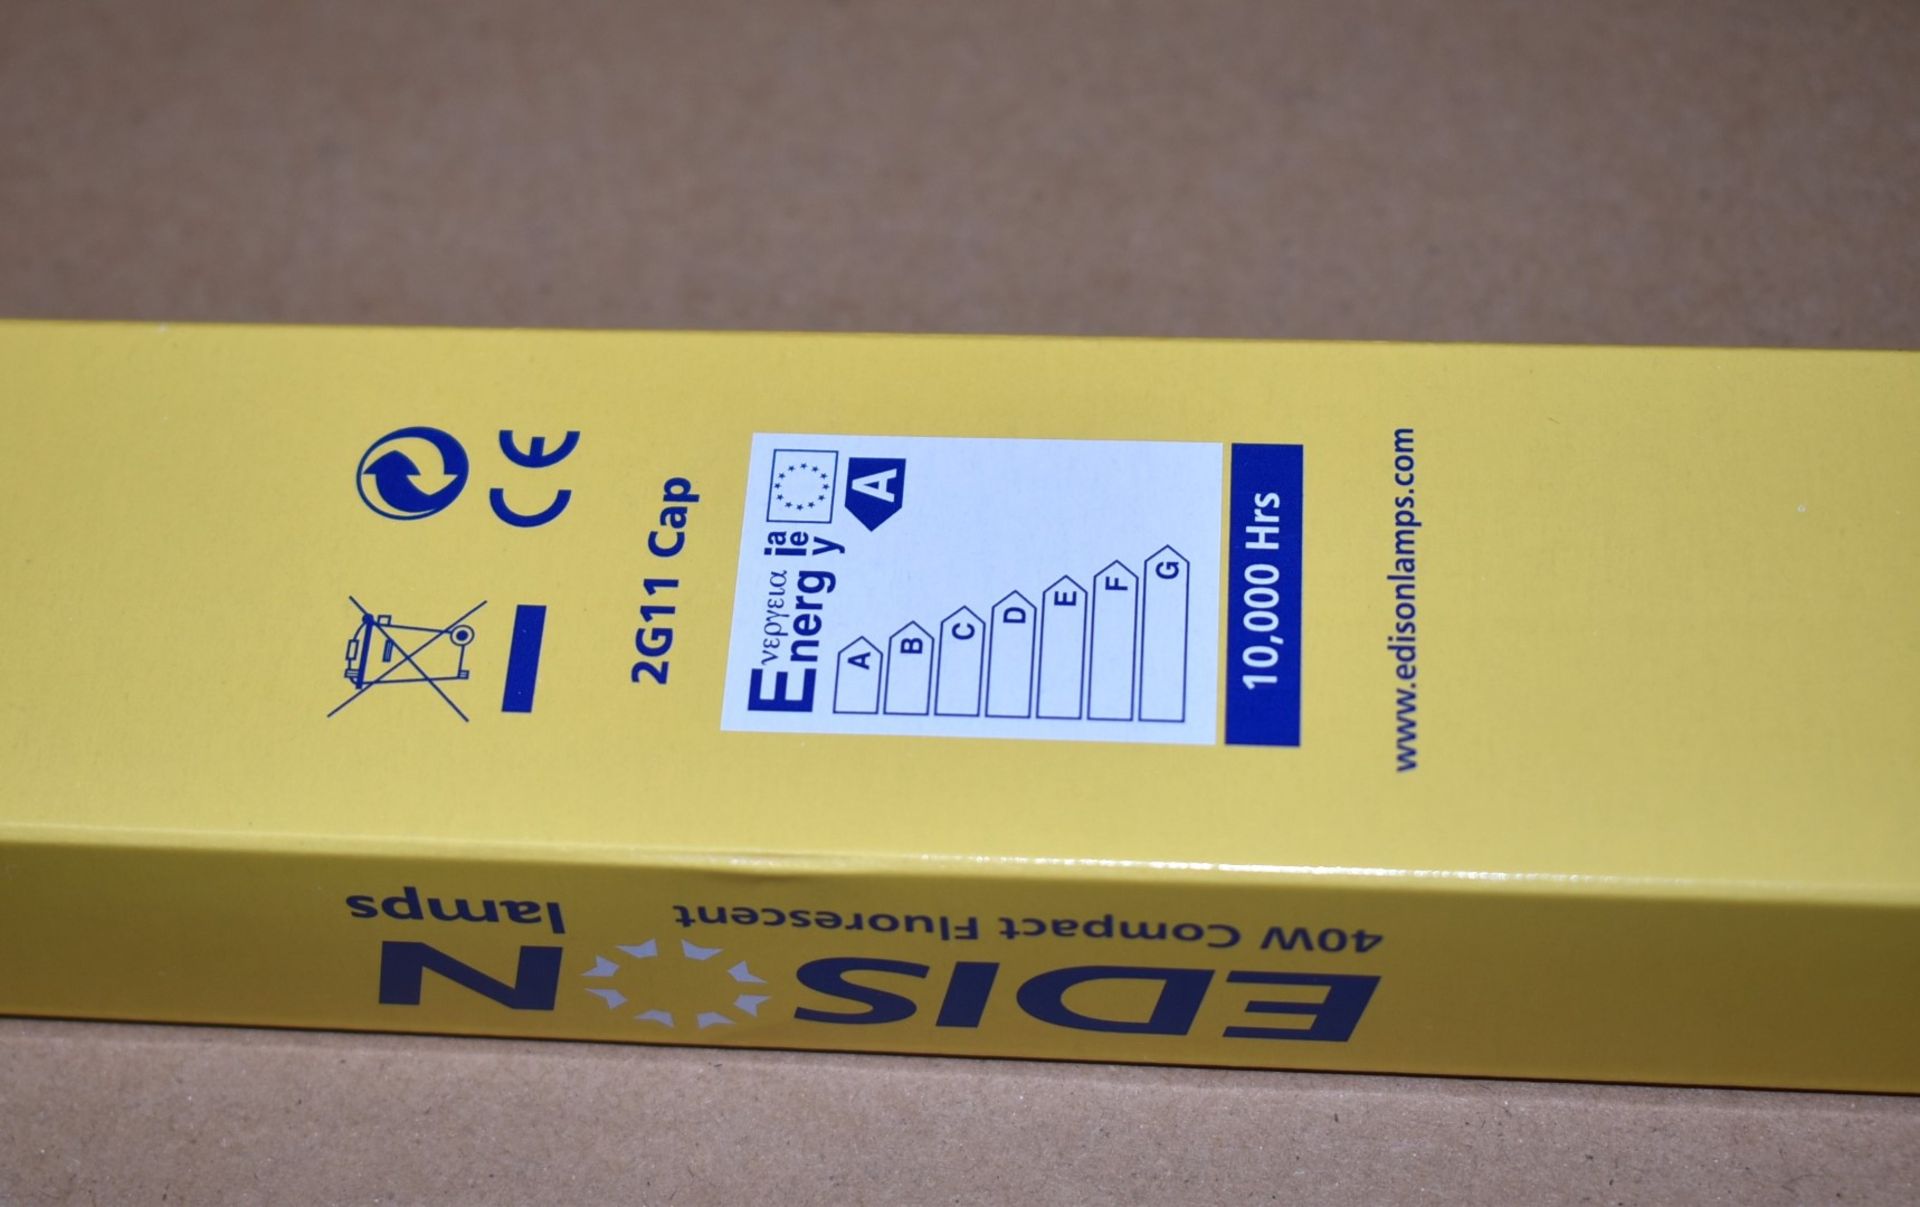 10 x Edison 40W 2G11 4 Pin Long Compact 3000K Fluorescent Lamps - New Boxed Stock - RRP £70 - Image 5 of 7